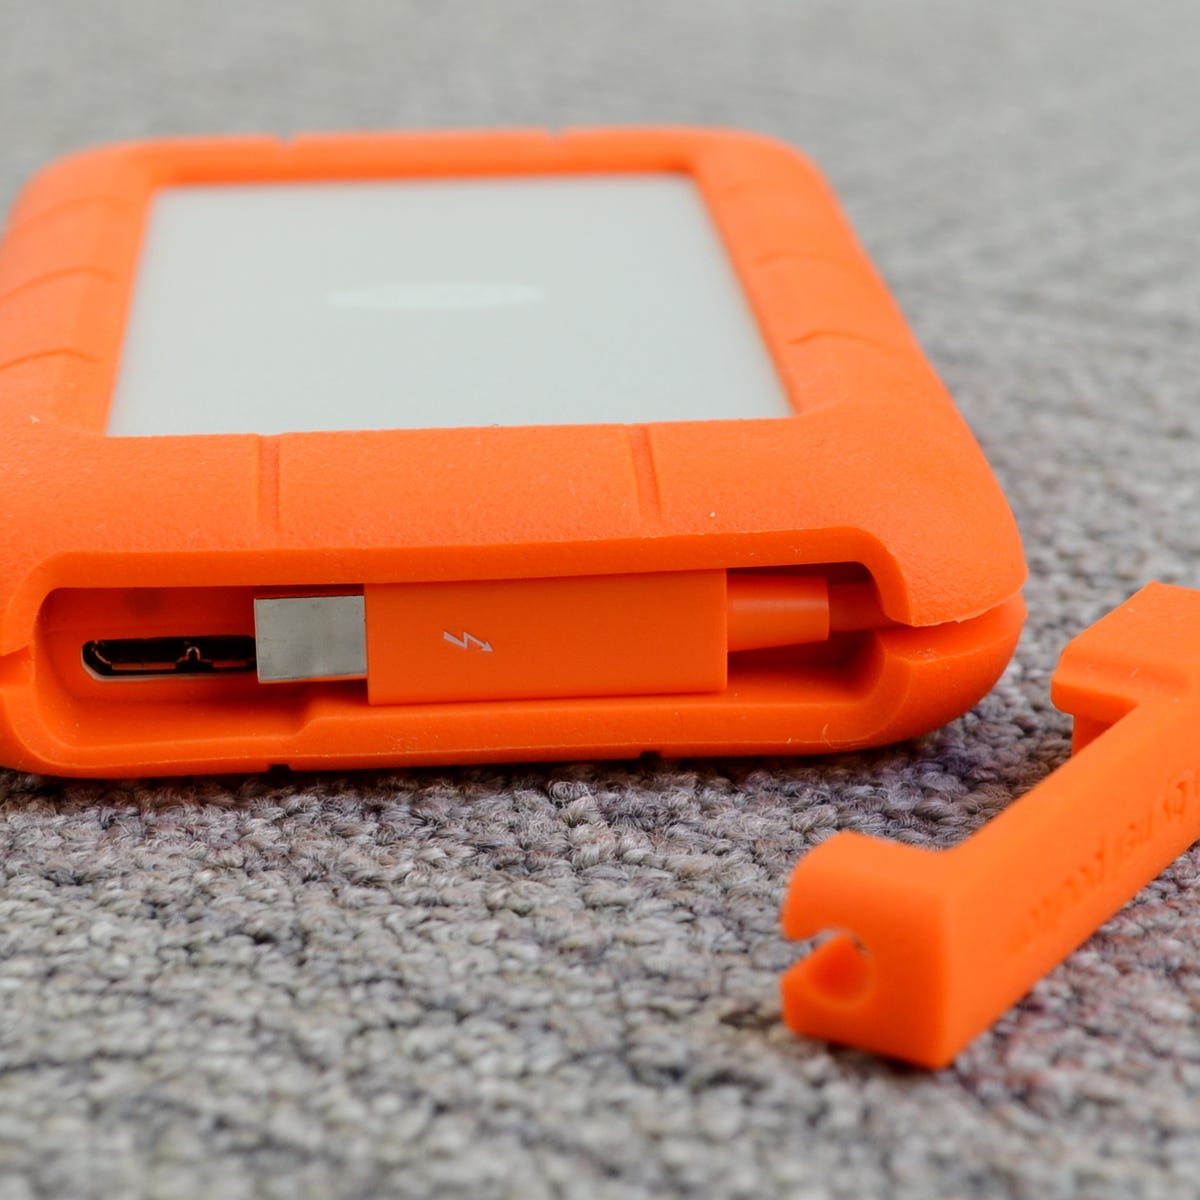 LaCie Rugged All-Terrain Drive review: Rugged design meets extreme performance - CNET